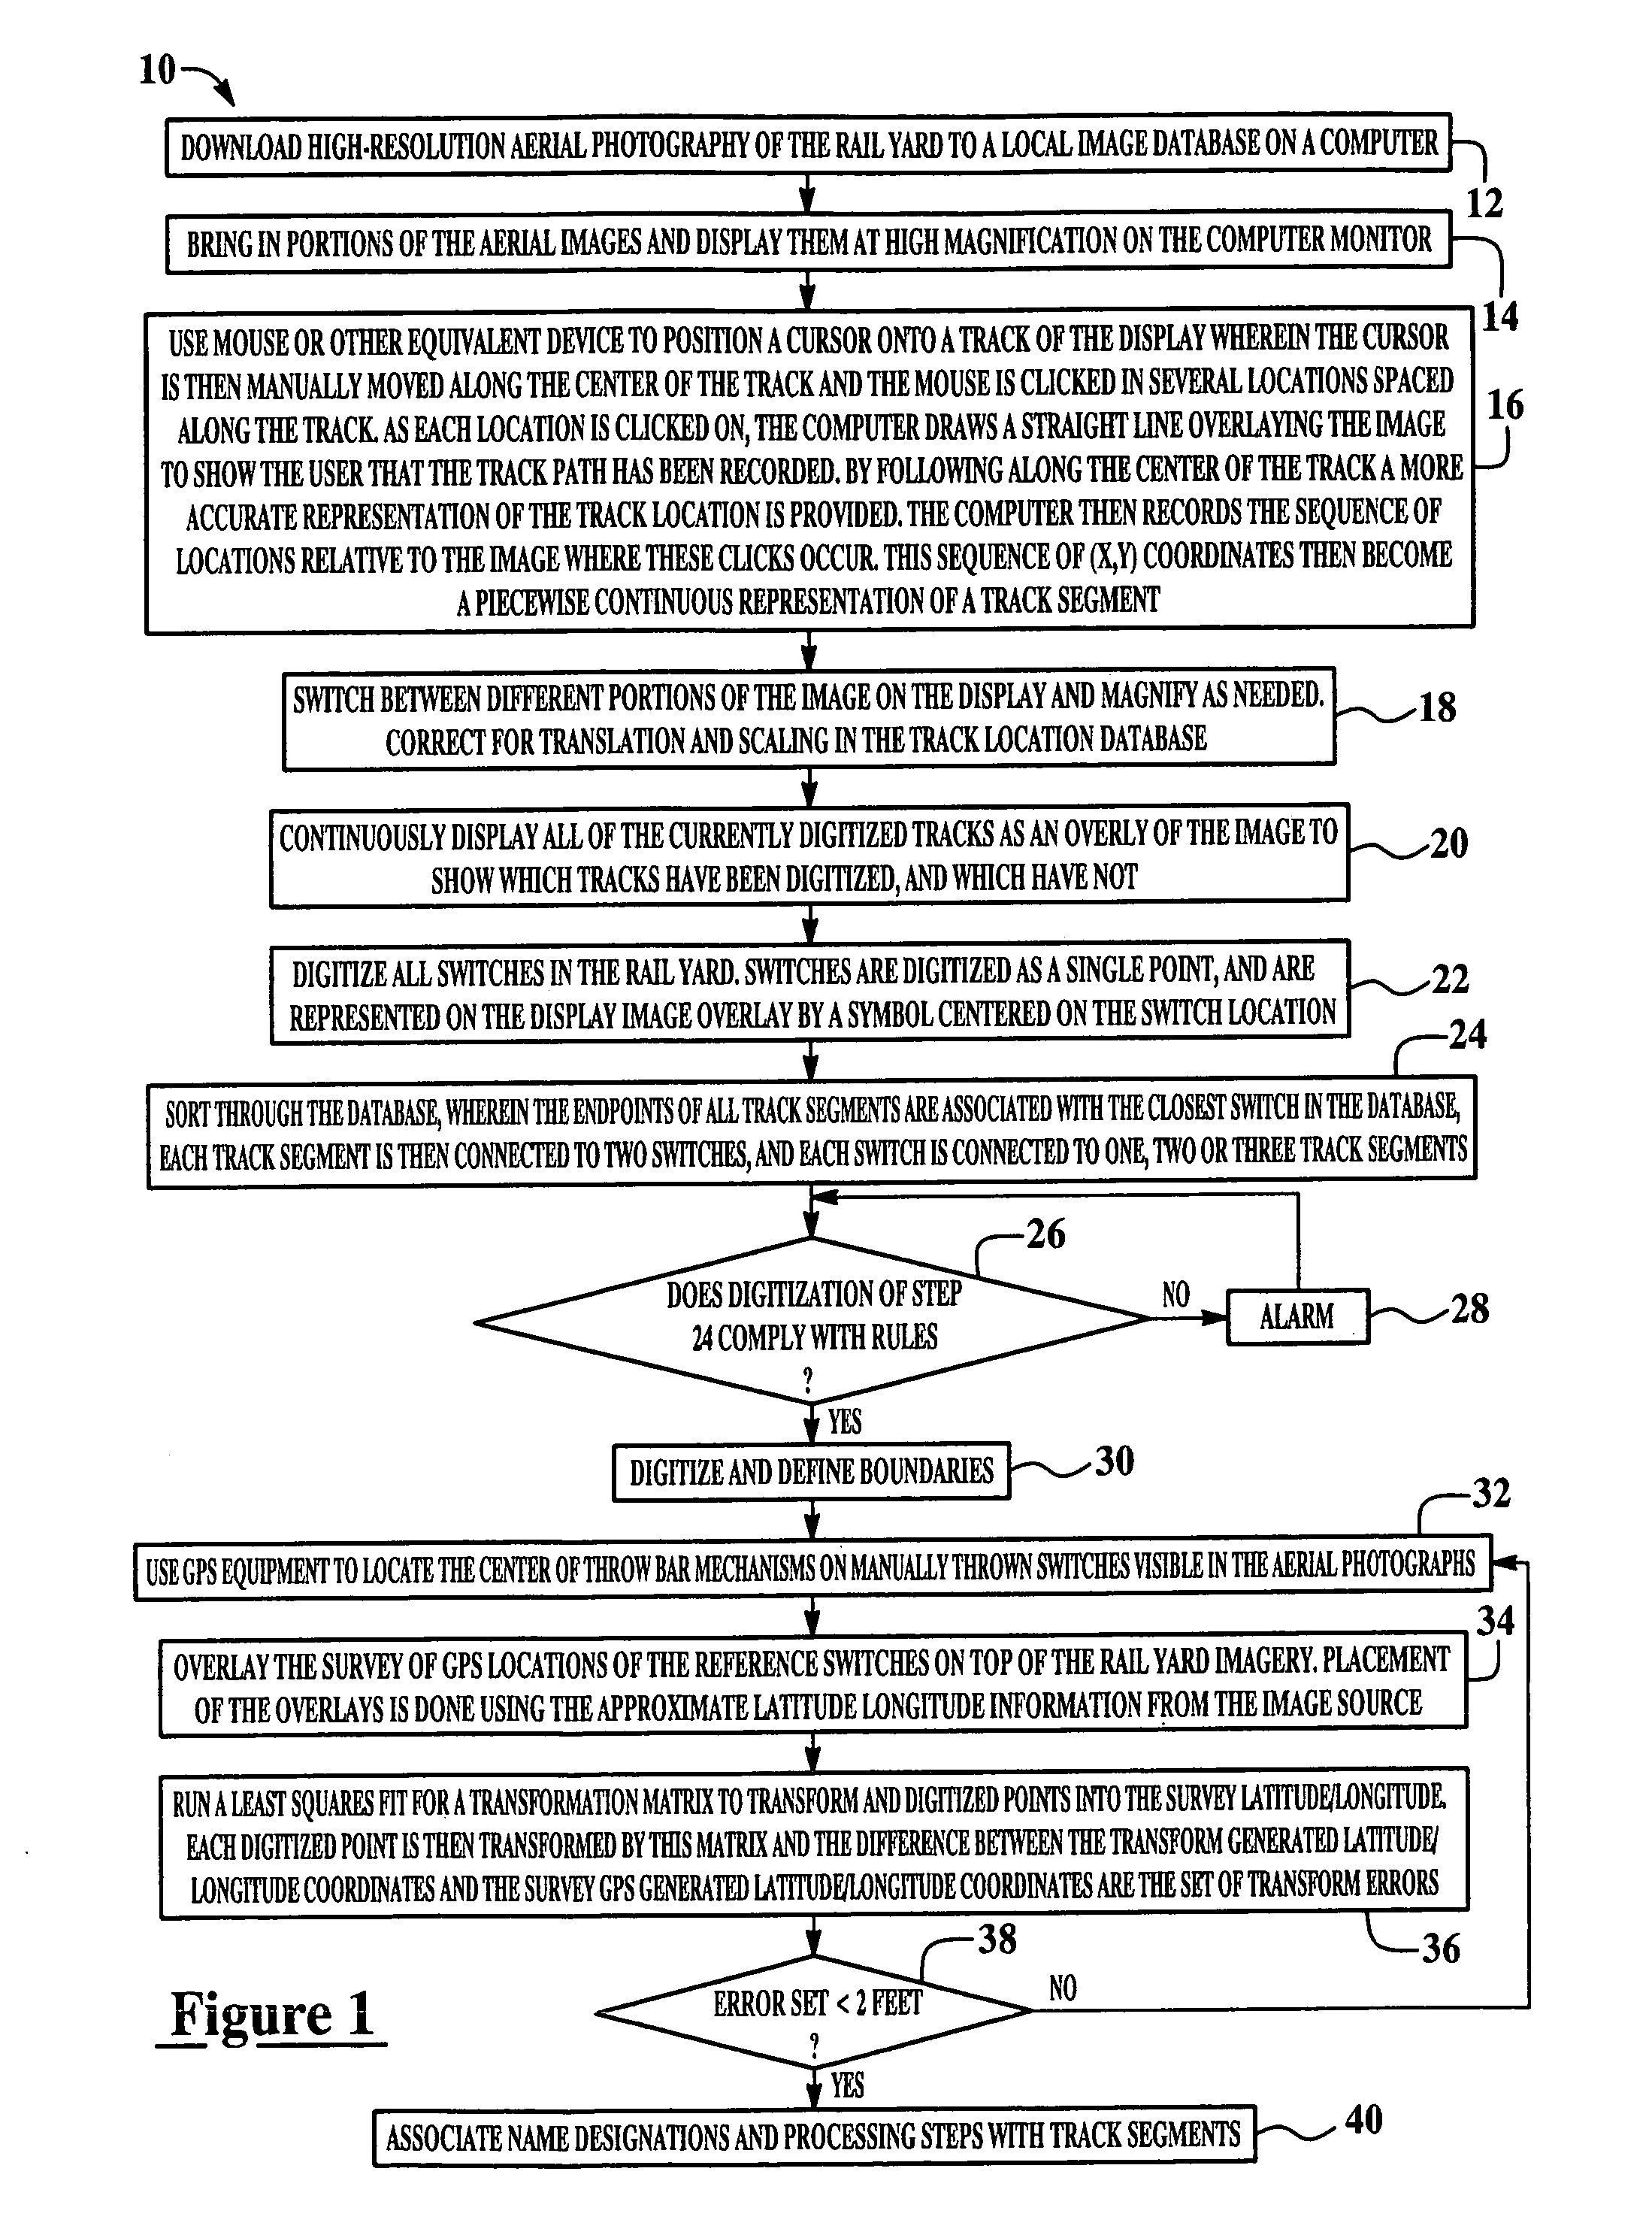 Apparatus and method for locating assets within a rail yard